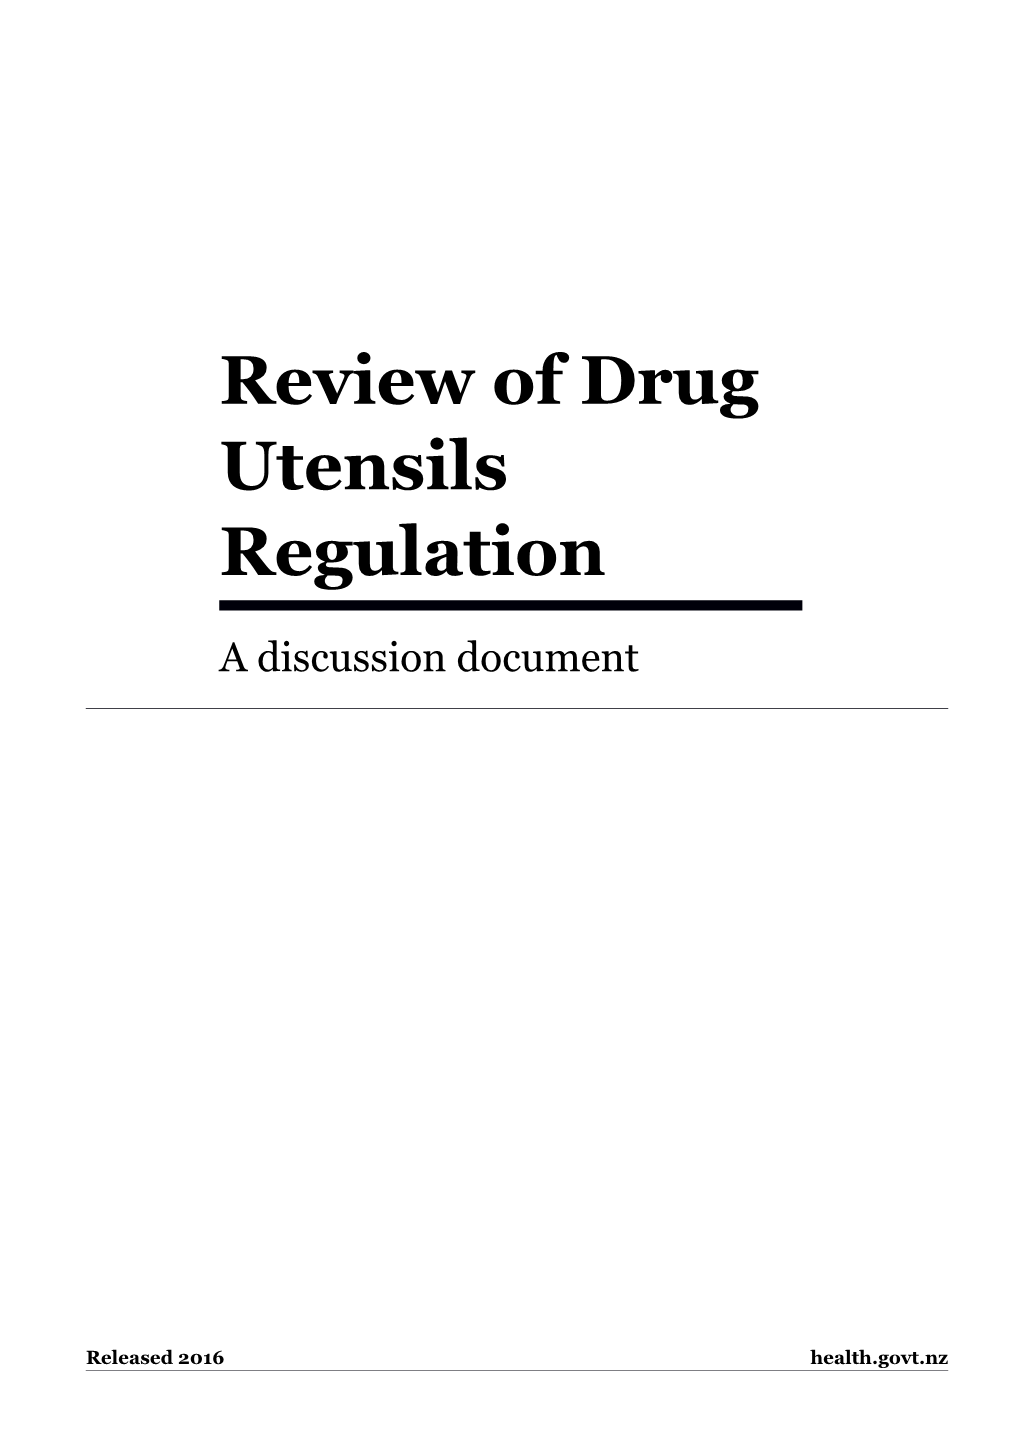 Review of Drug Utensil Regualtion Discussion Document